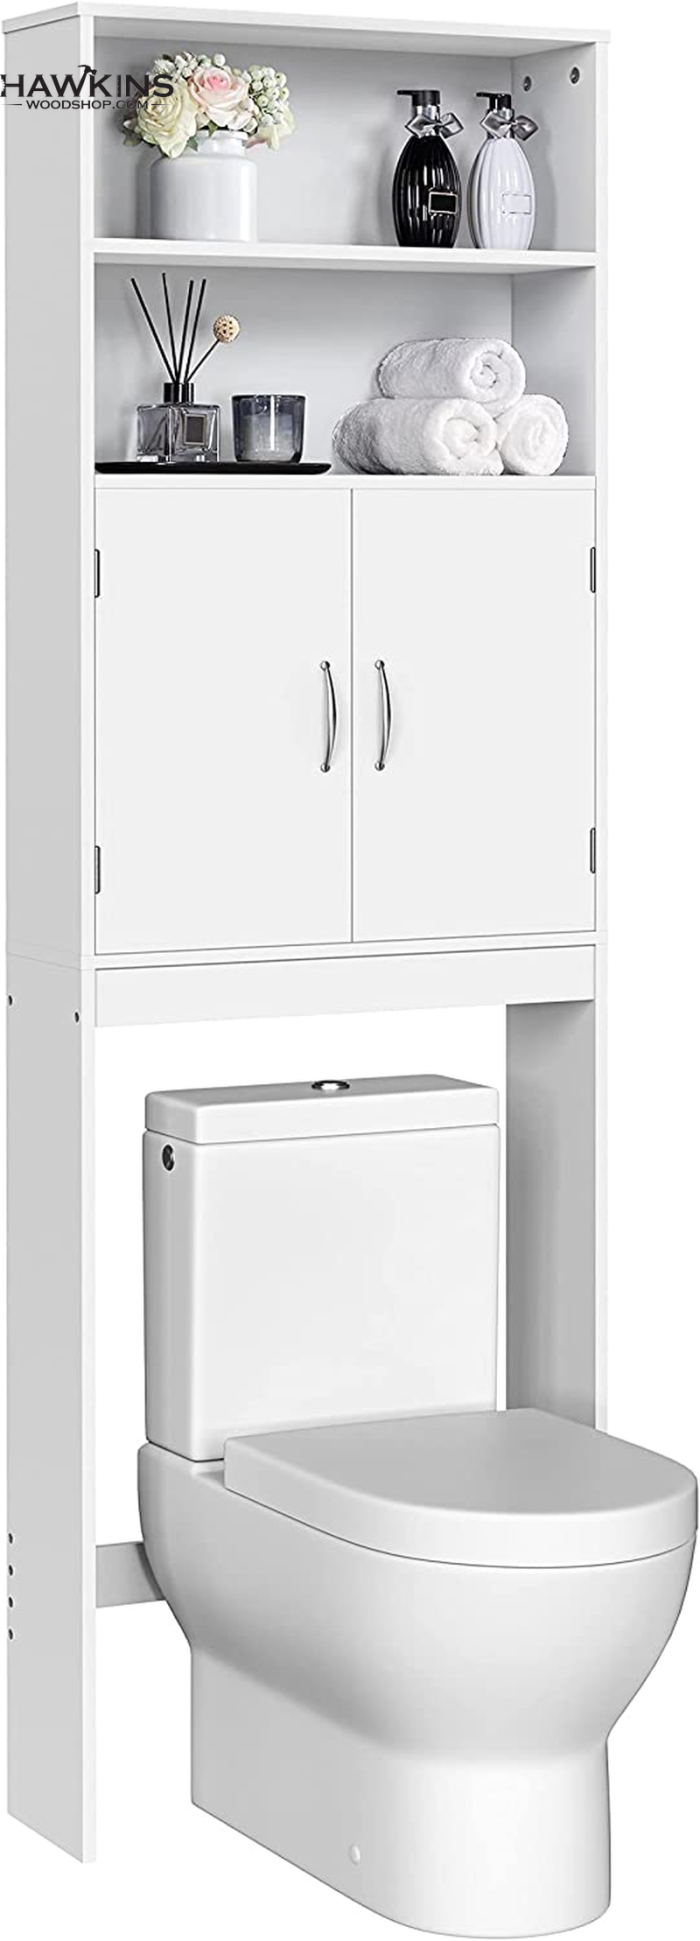 25 in. W x 77 in. H x 7.9 in. D Gray Bathroom Over-the-Toilet Storage  Cabinet